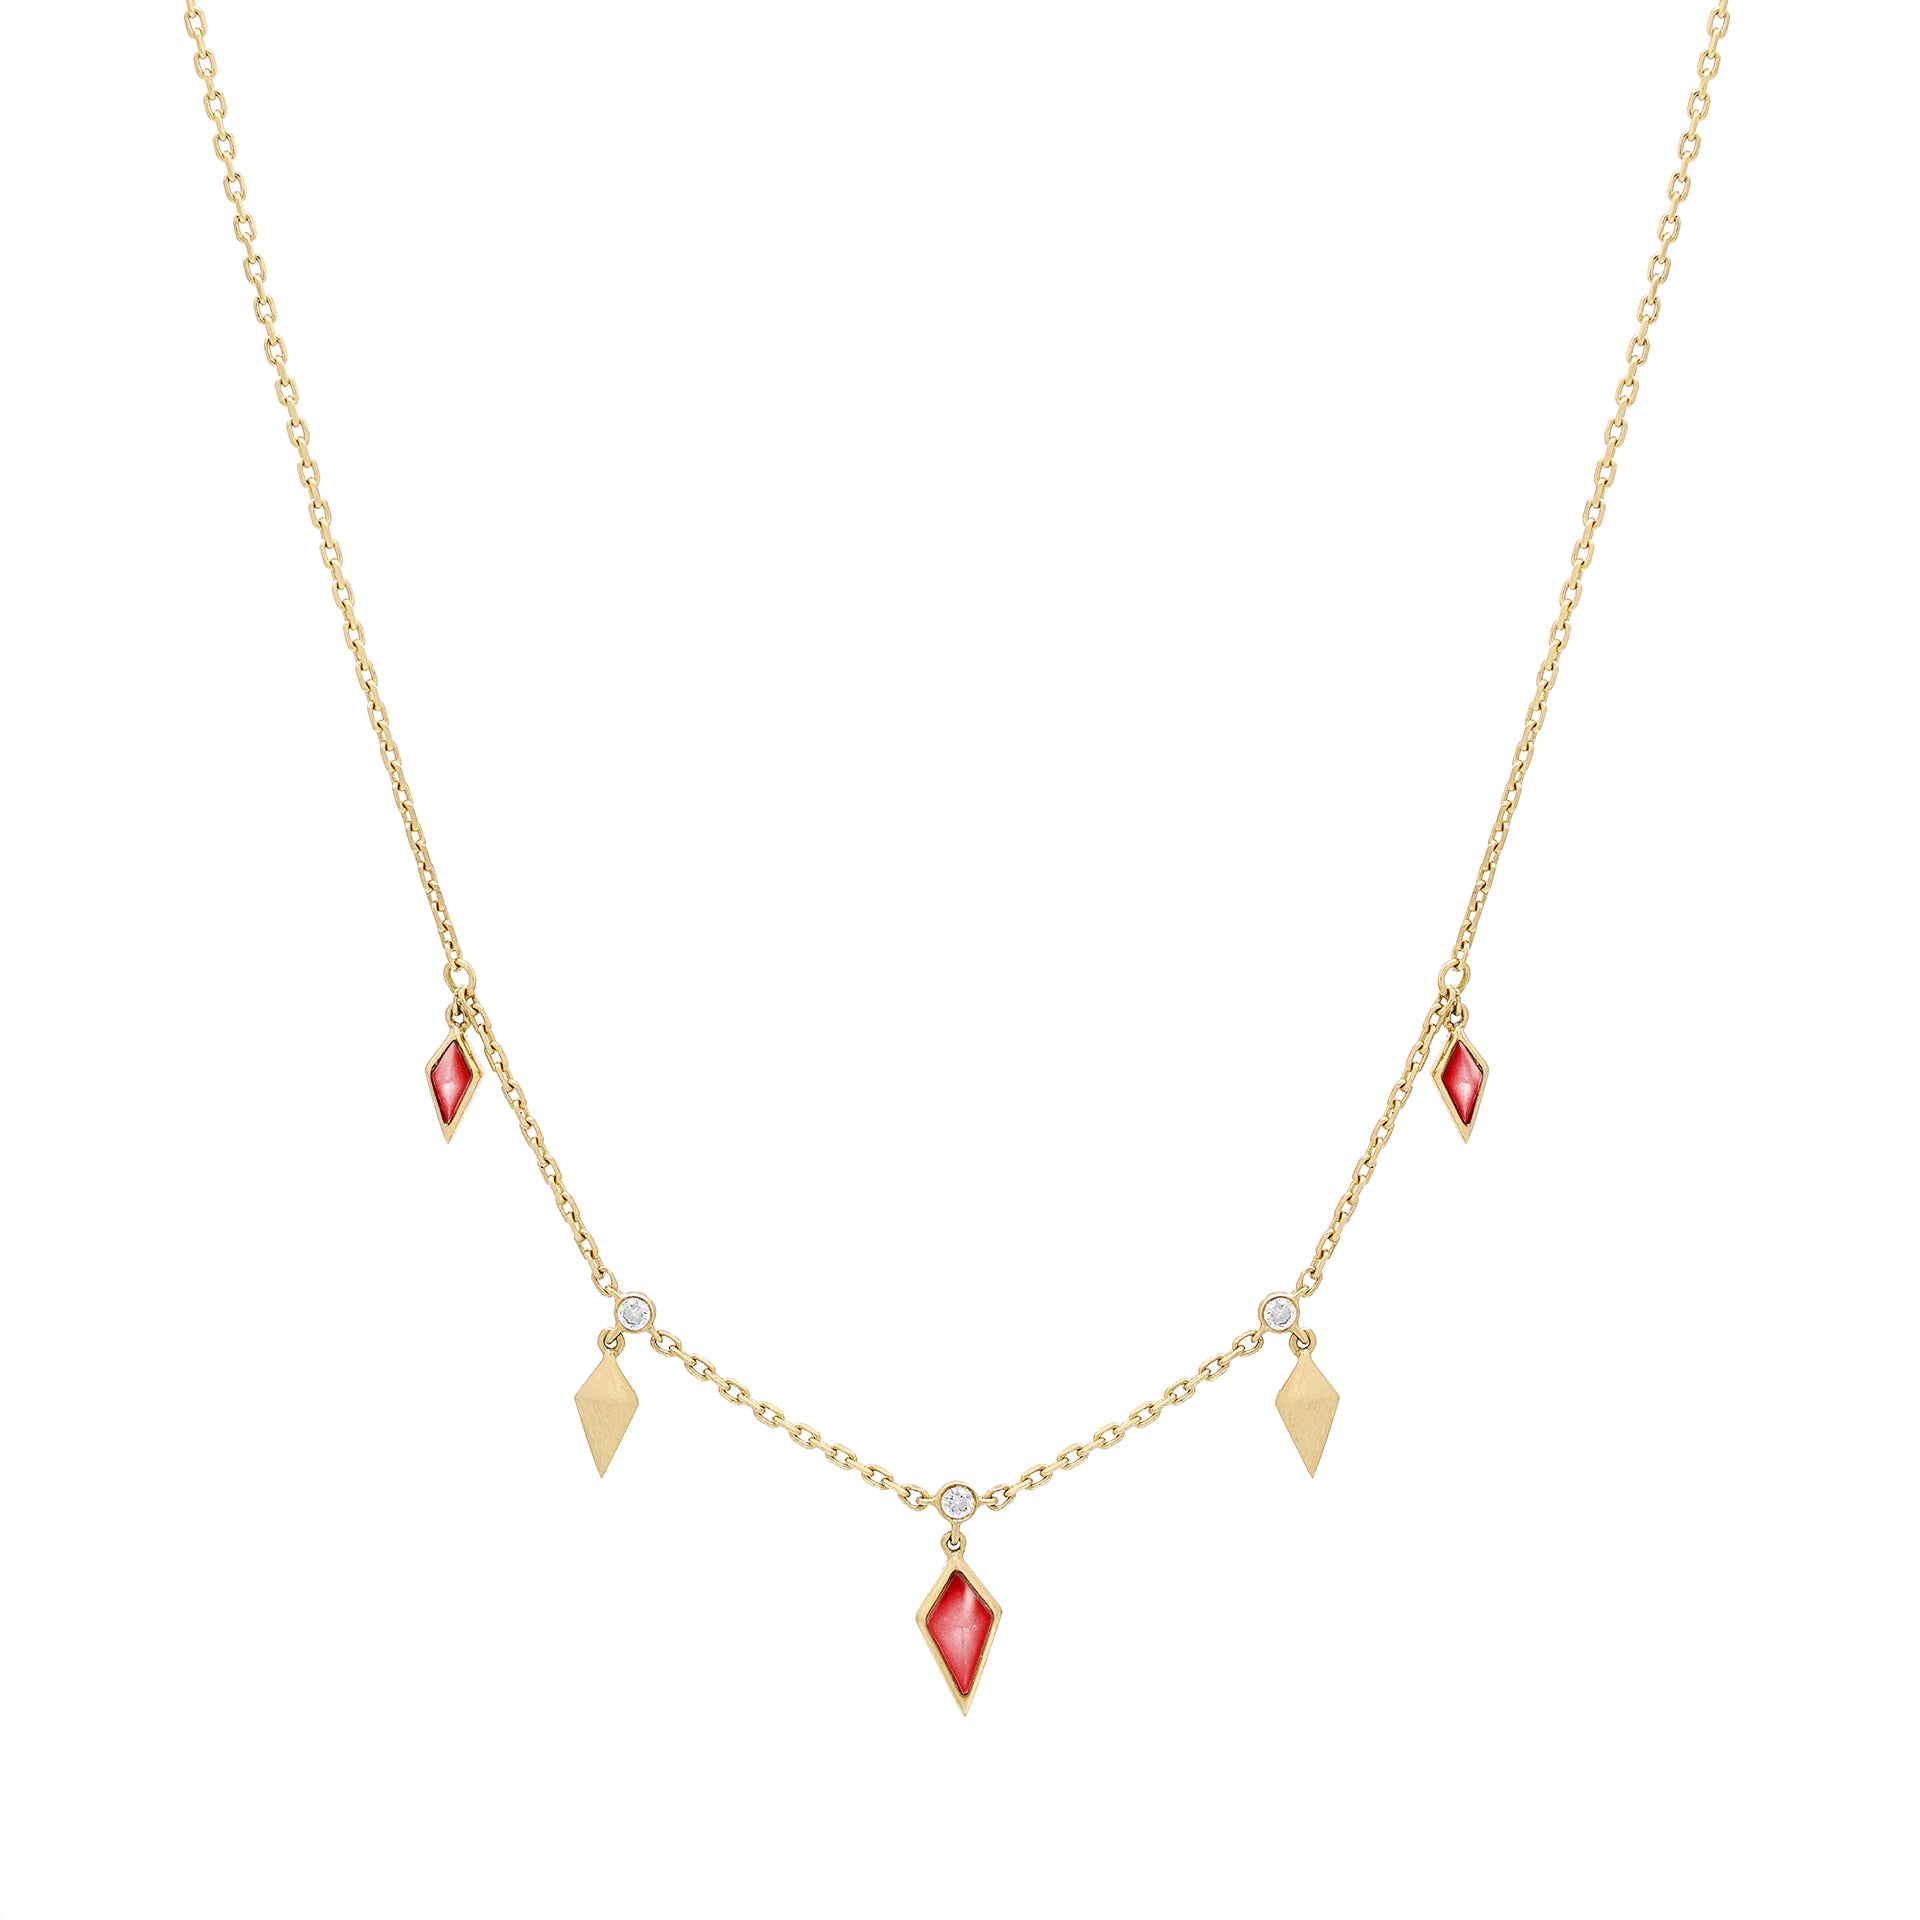 Al Merta’shah Necklace in Diamonds and Red Agate